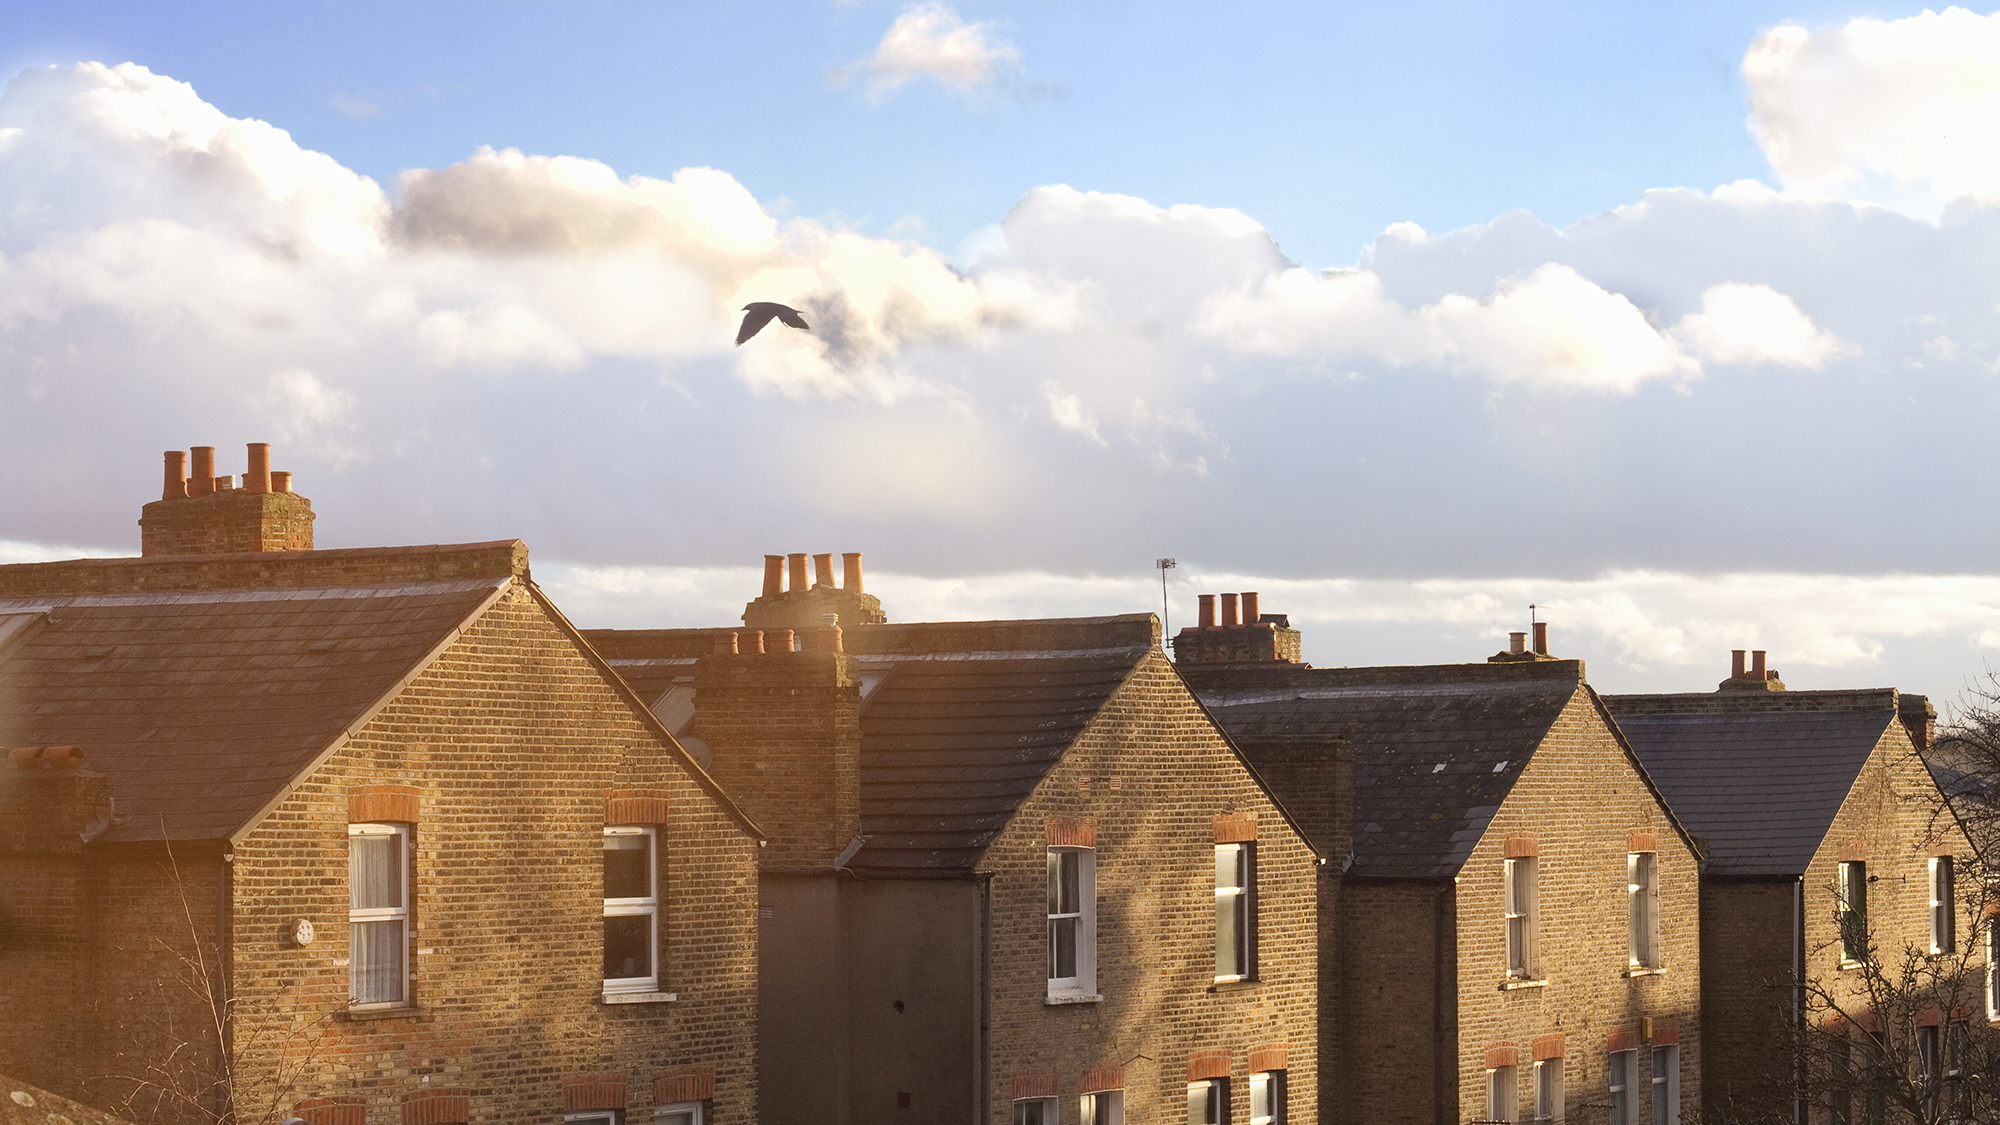 A row of terraced house rooftops